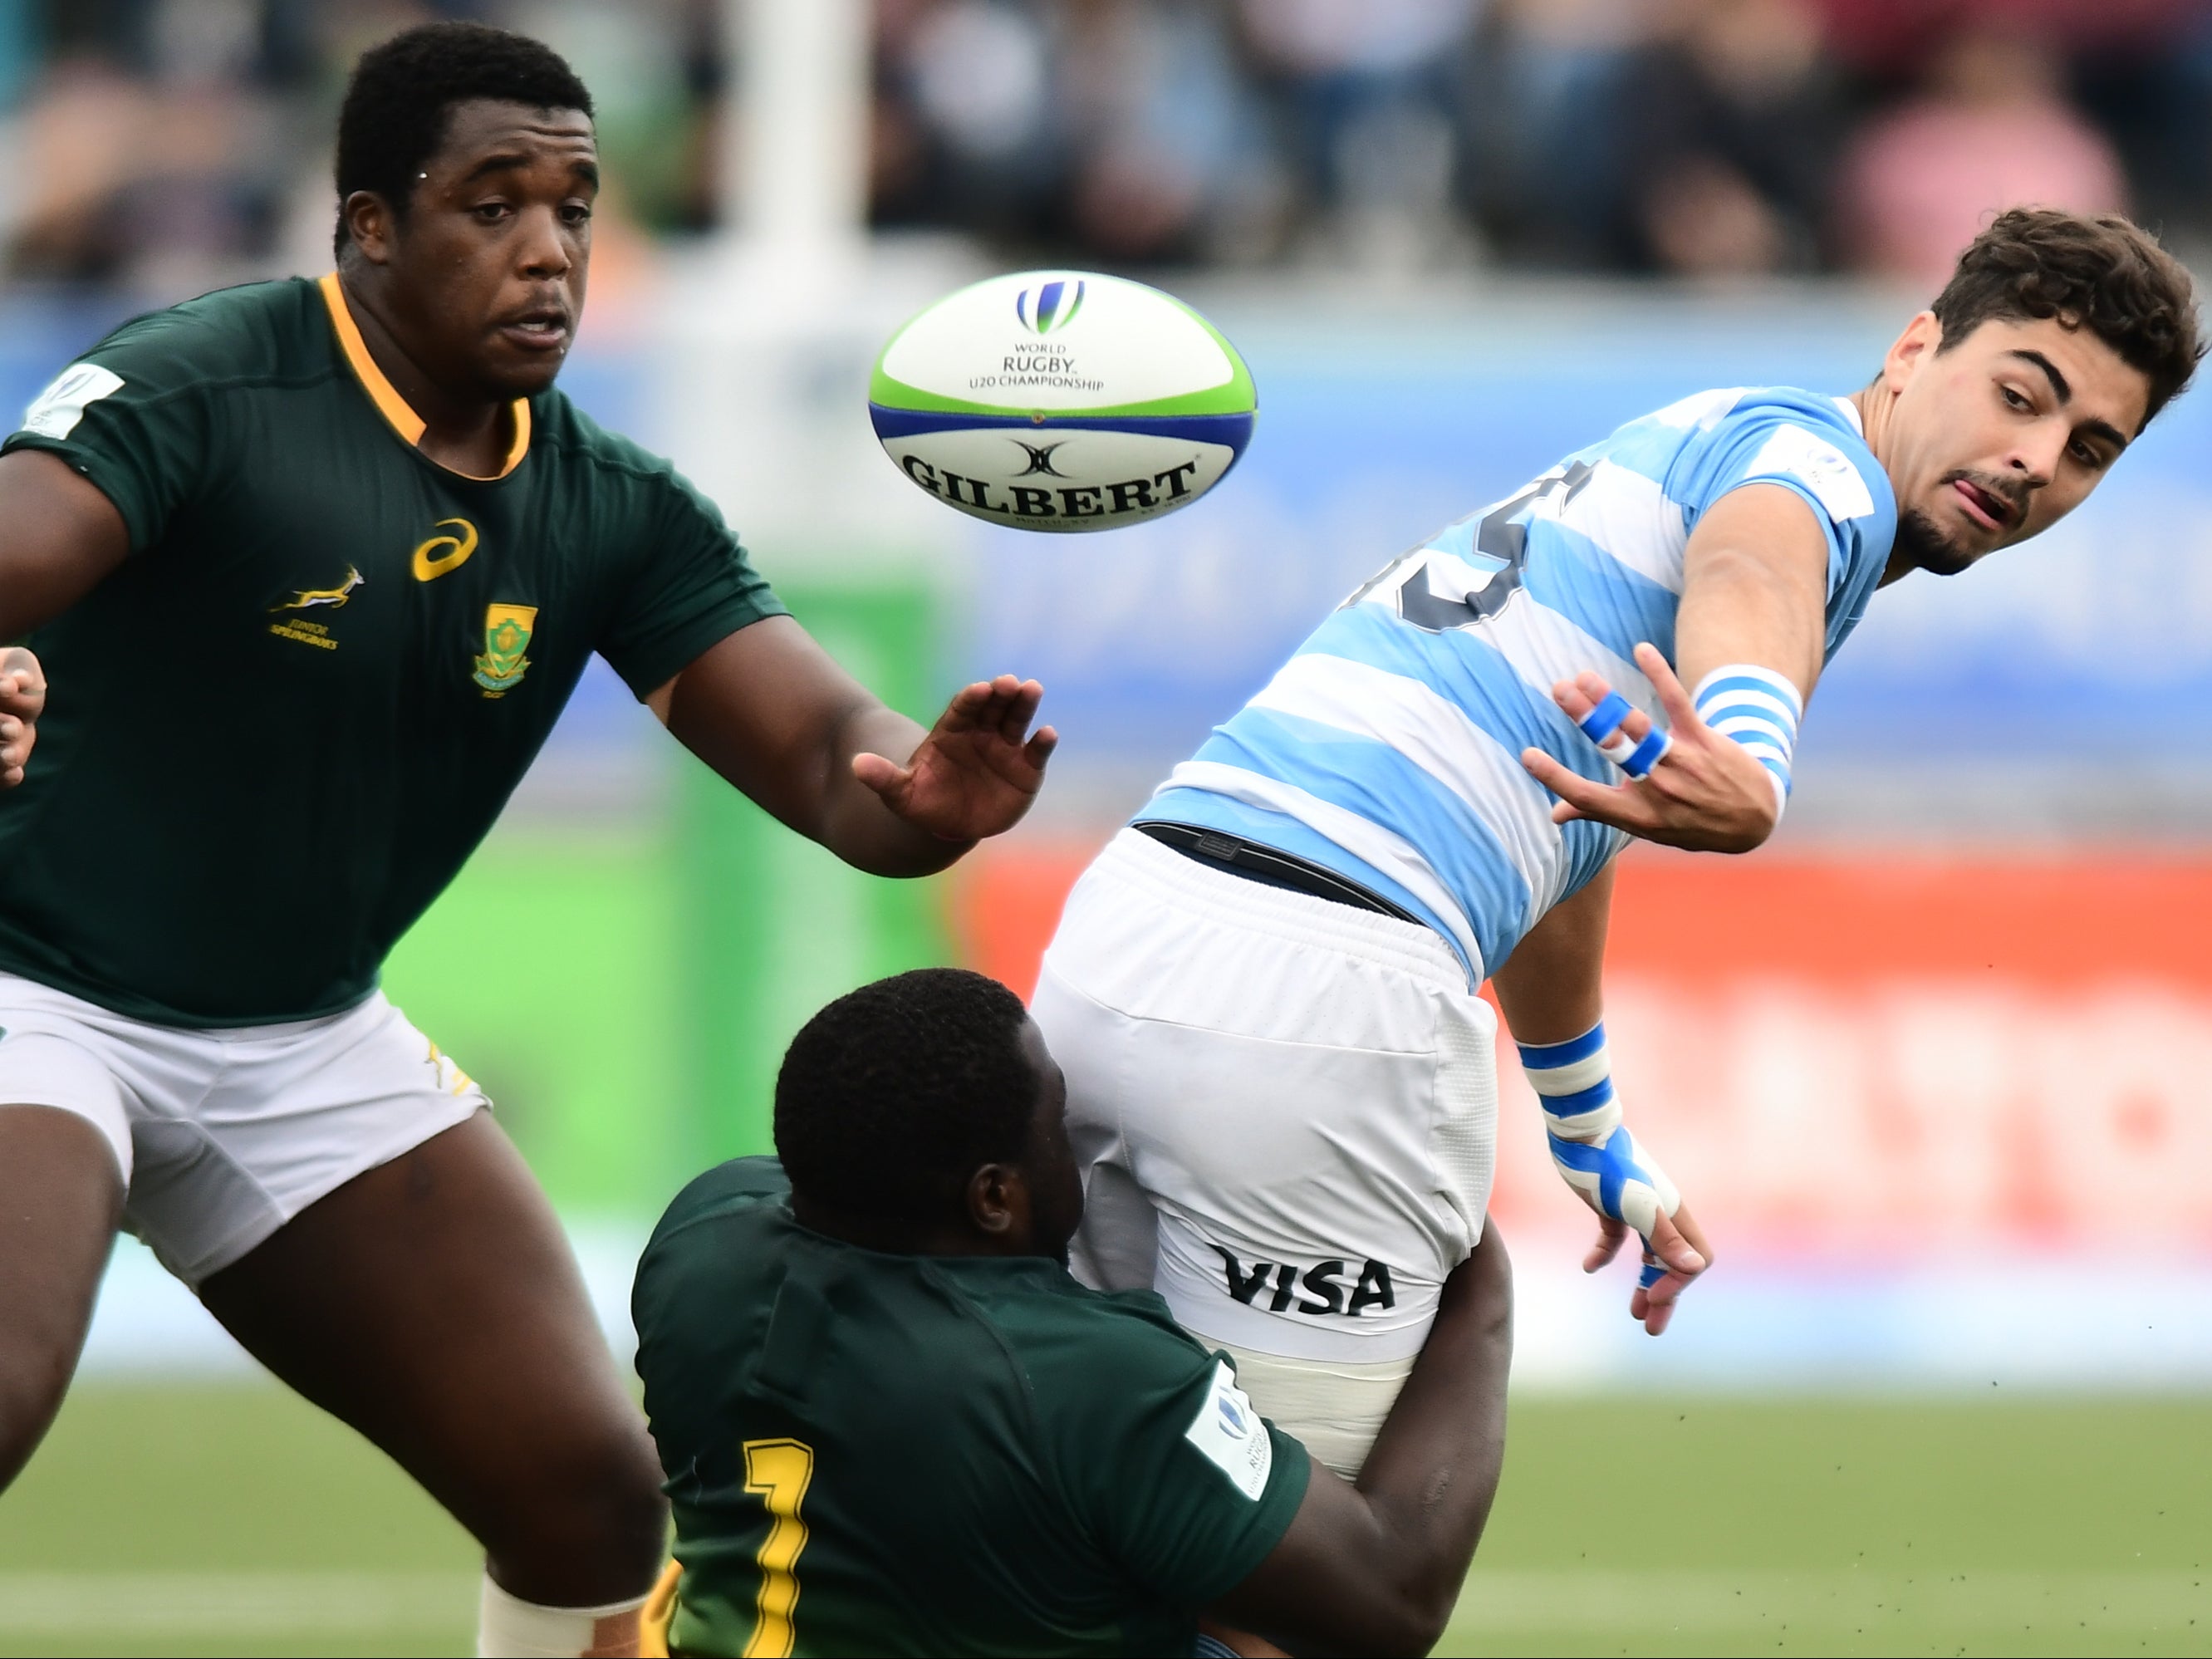 The technology will be trialled at this summer’s U20 Championship in South Africa